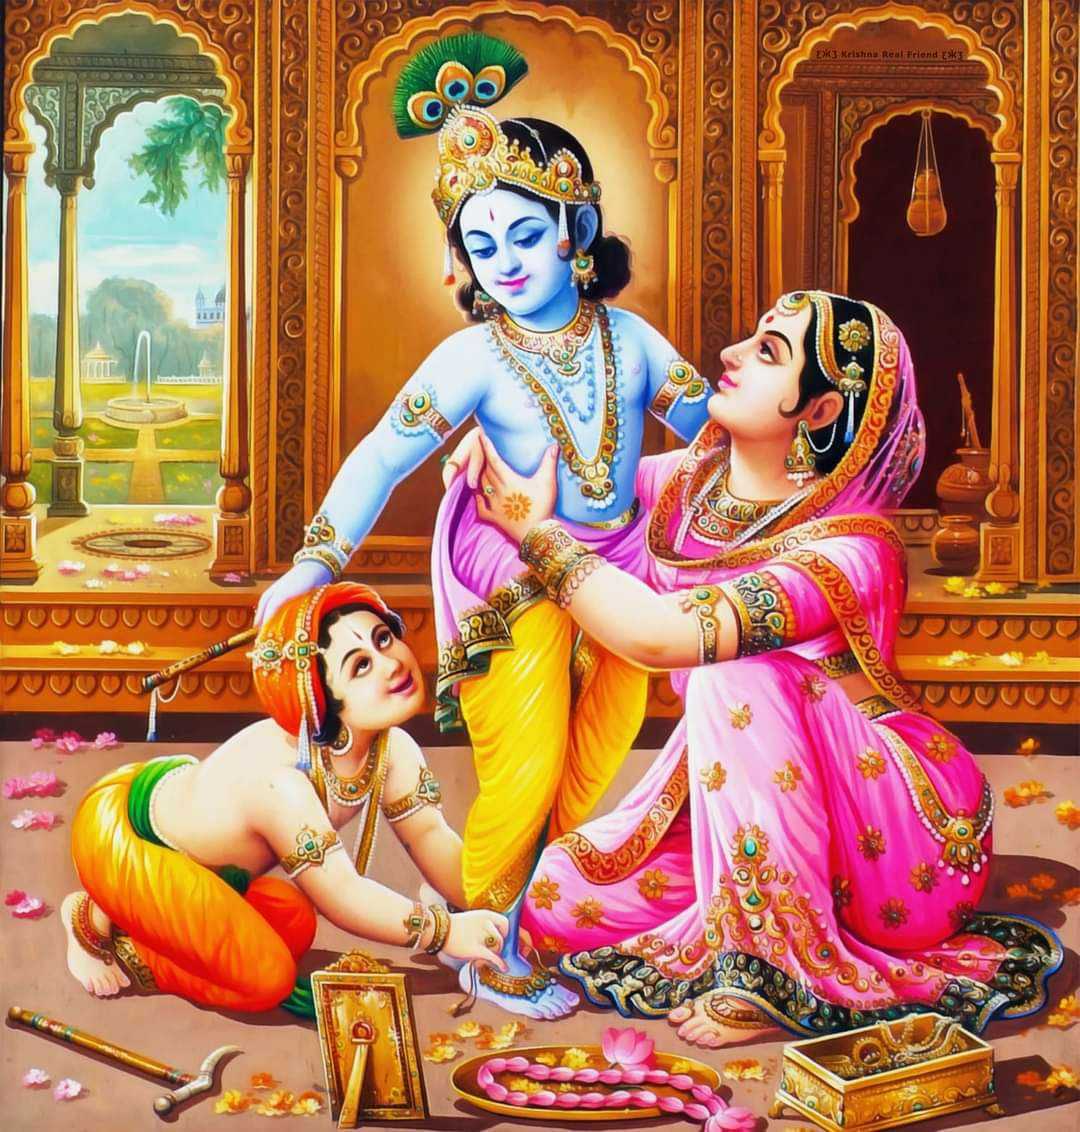 Lord Krishna with Mother Yashoda and Playing with Friends Image - Lord Krishna with Mother Yashoda and Playing with Friends Image